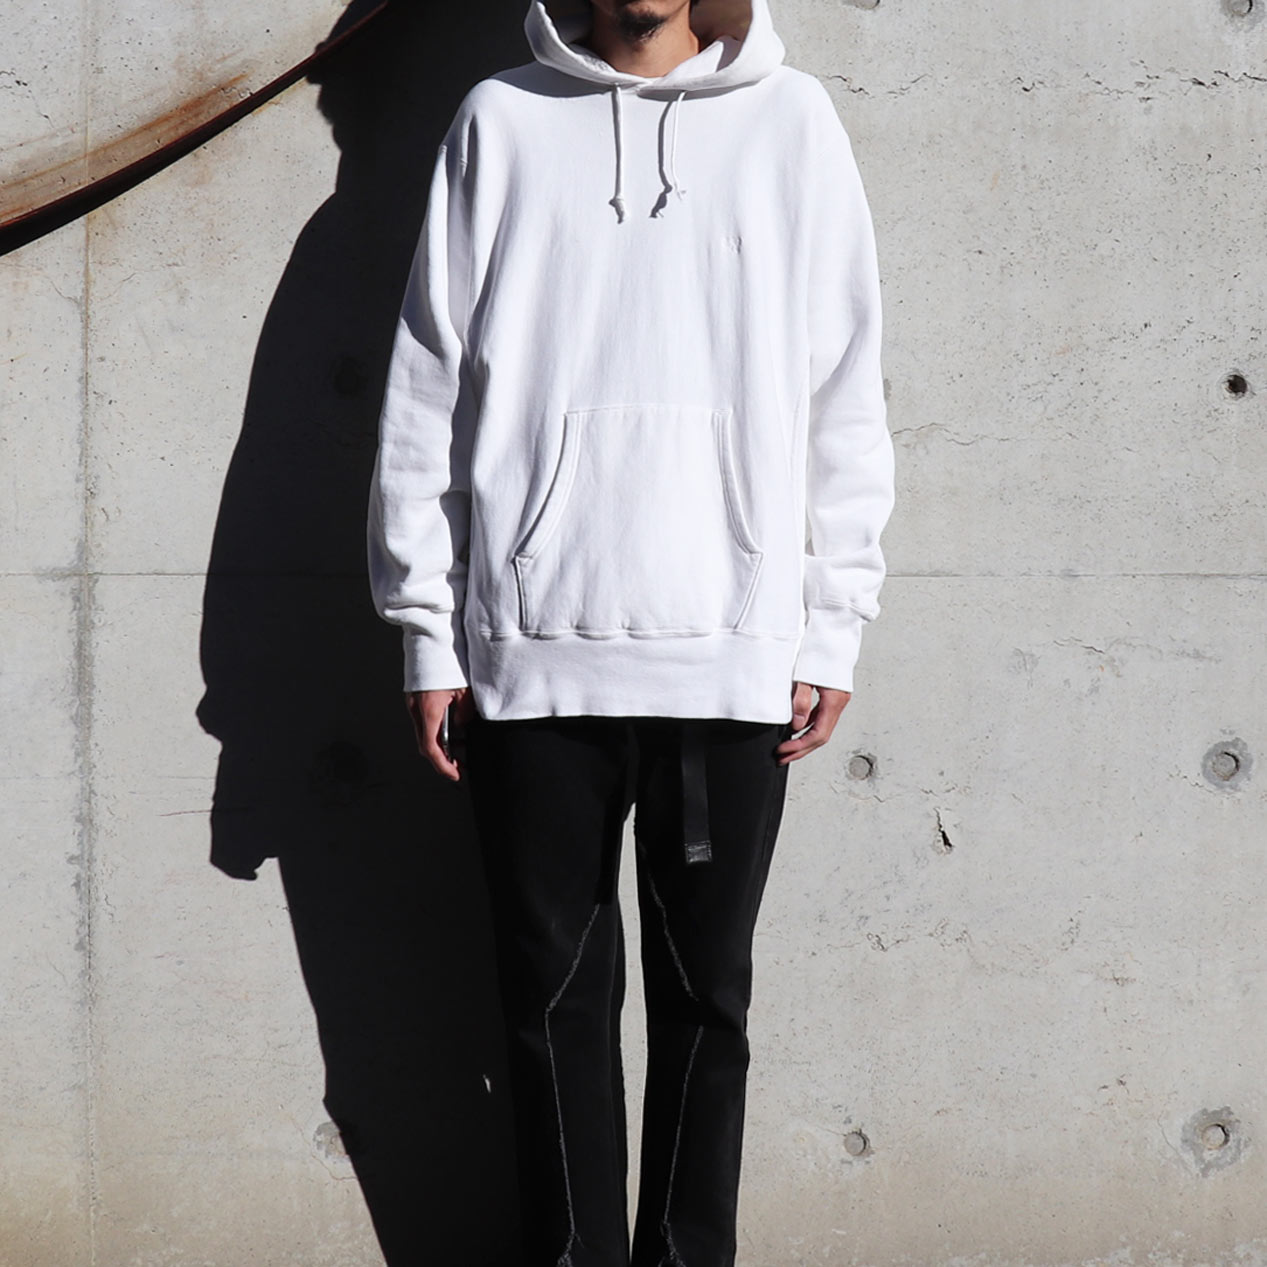 POST JUNK / 80's CHAMPION×ABERCROMBIE & FITCH “WHITE” Reverse